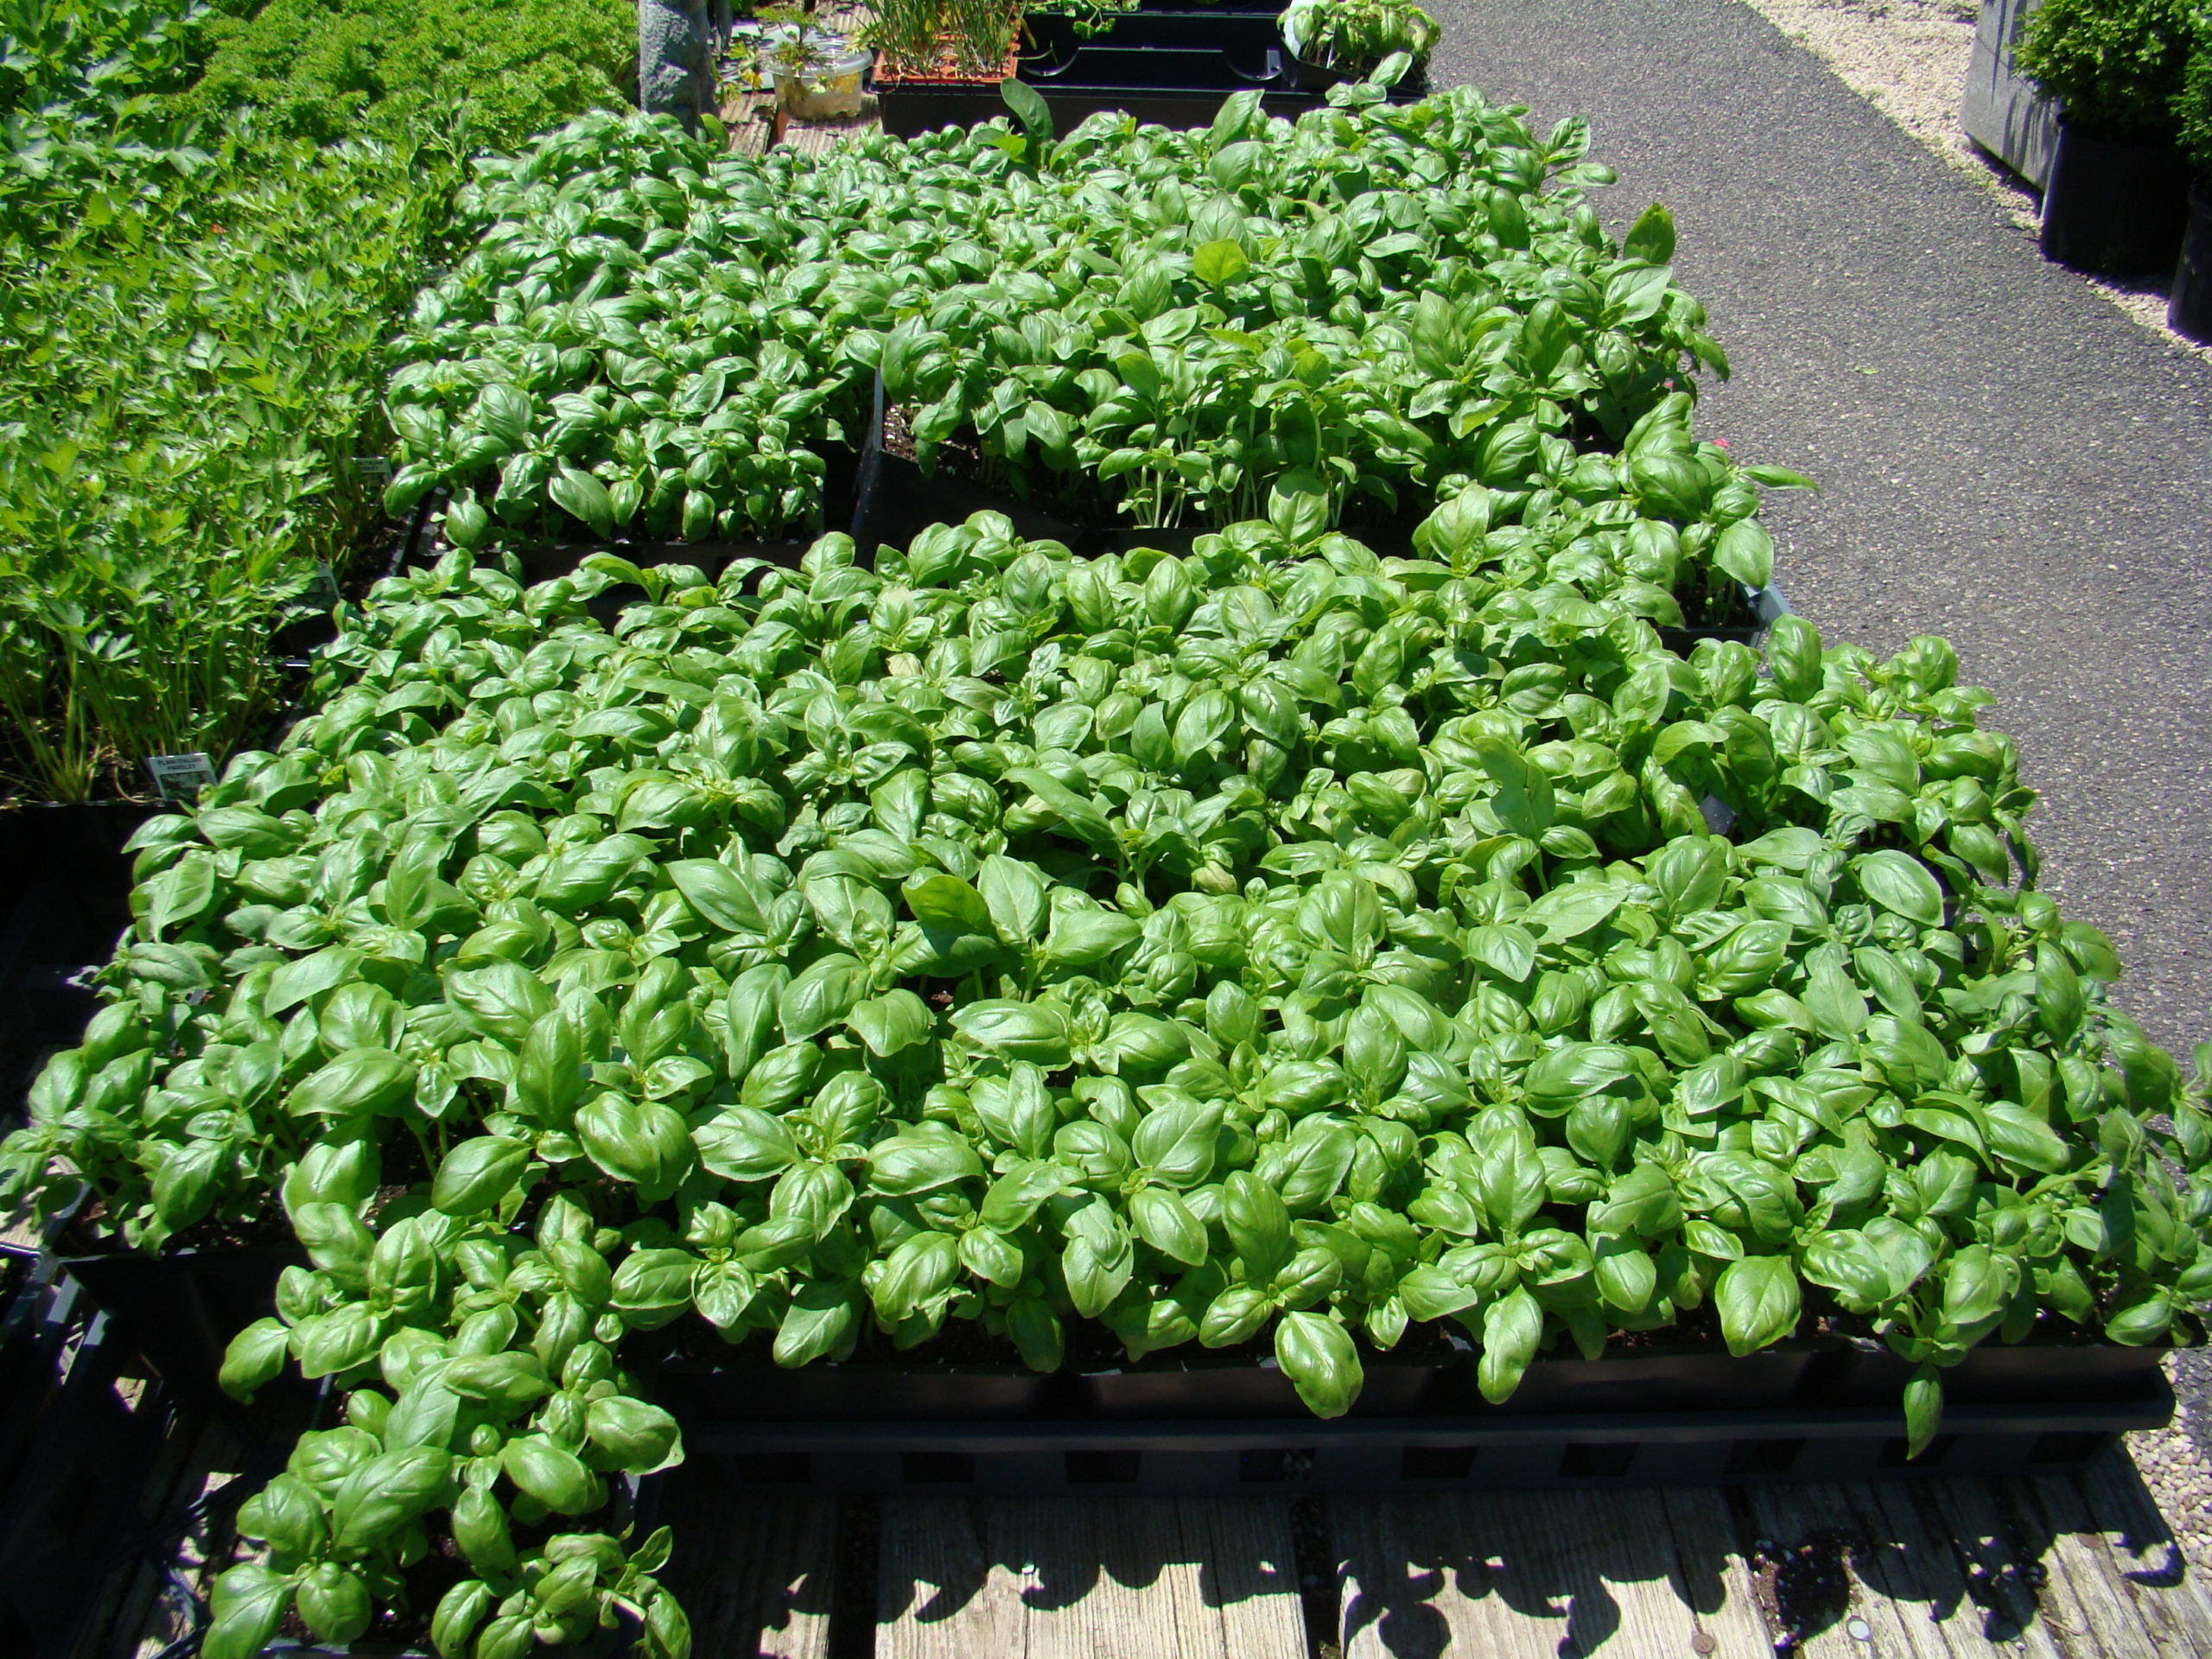 It’ll be May before you see these basil seedlings at garden centers but you can start your own at home during the next month and grow them on warm windowsills or plant them in the garden when the soil is reliably warm. Cold soil is their downfall.